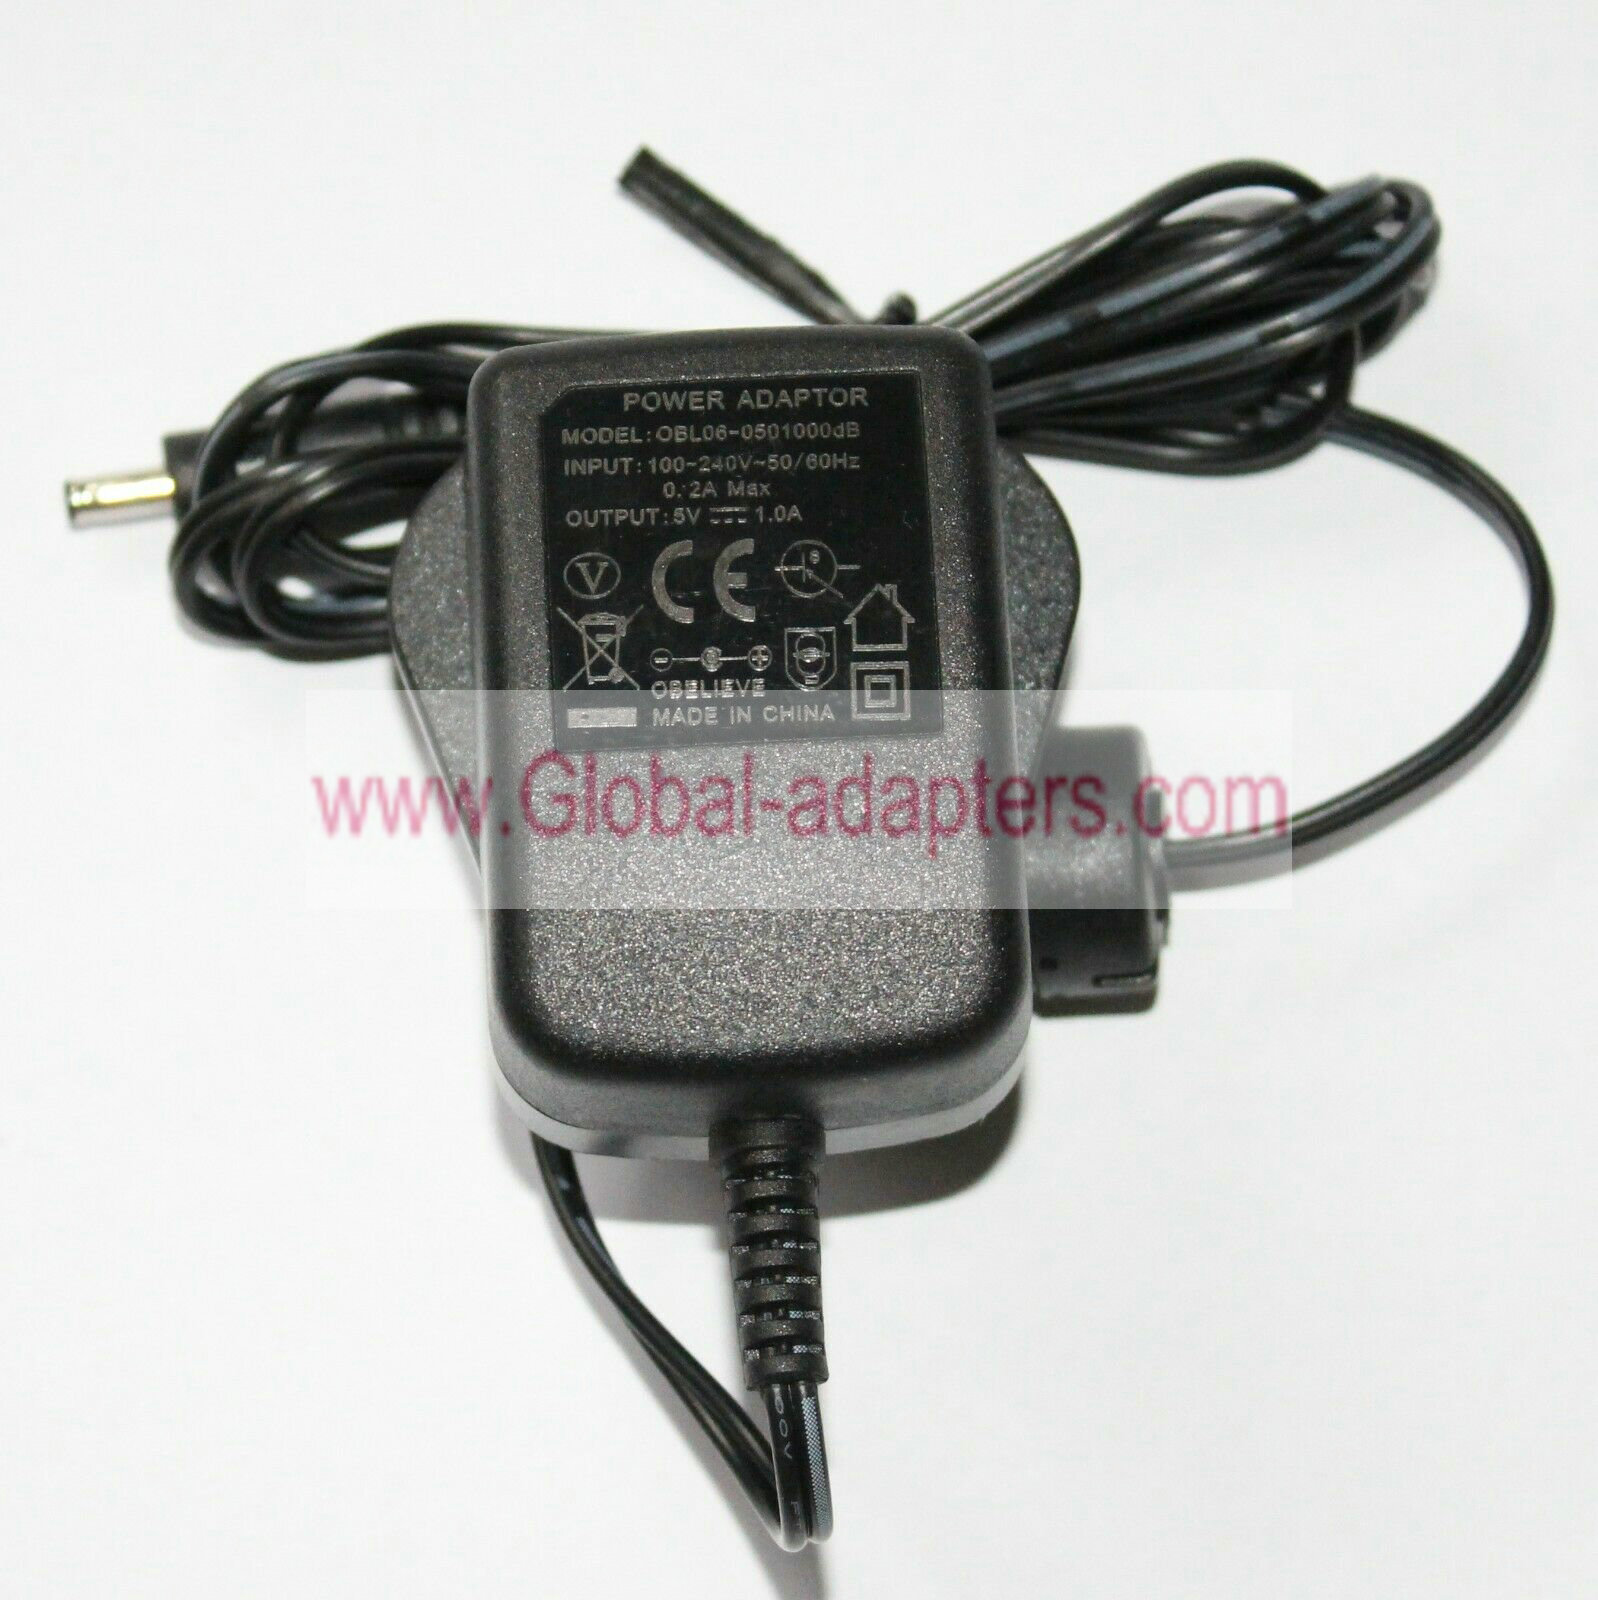 New OBELIEVE OBL06-0501000dB 5V 1A ac charger Power Adapter